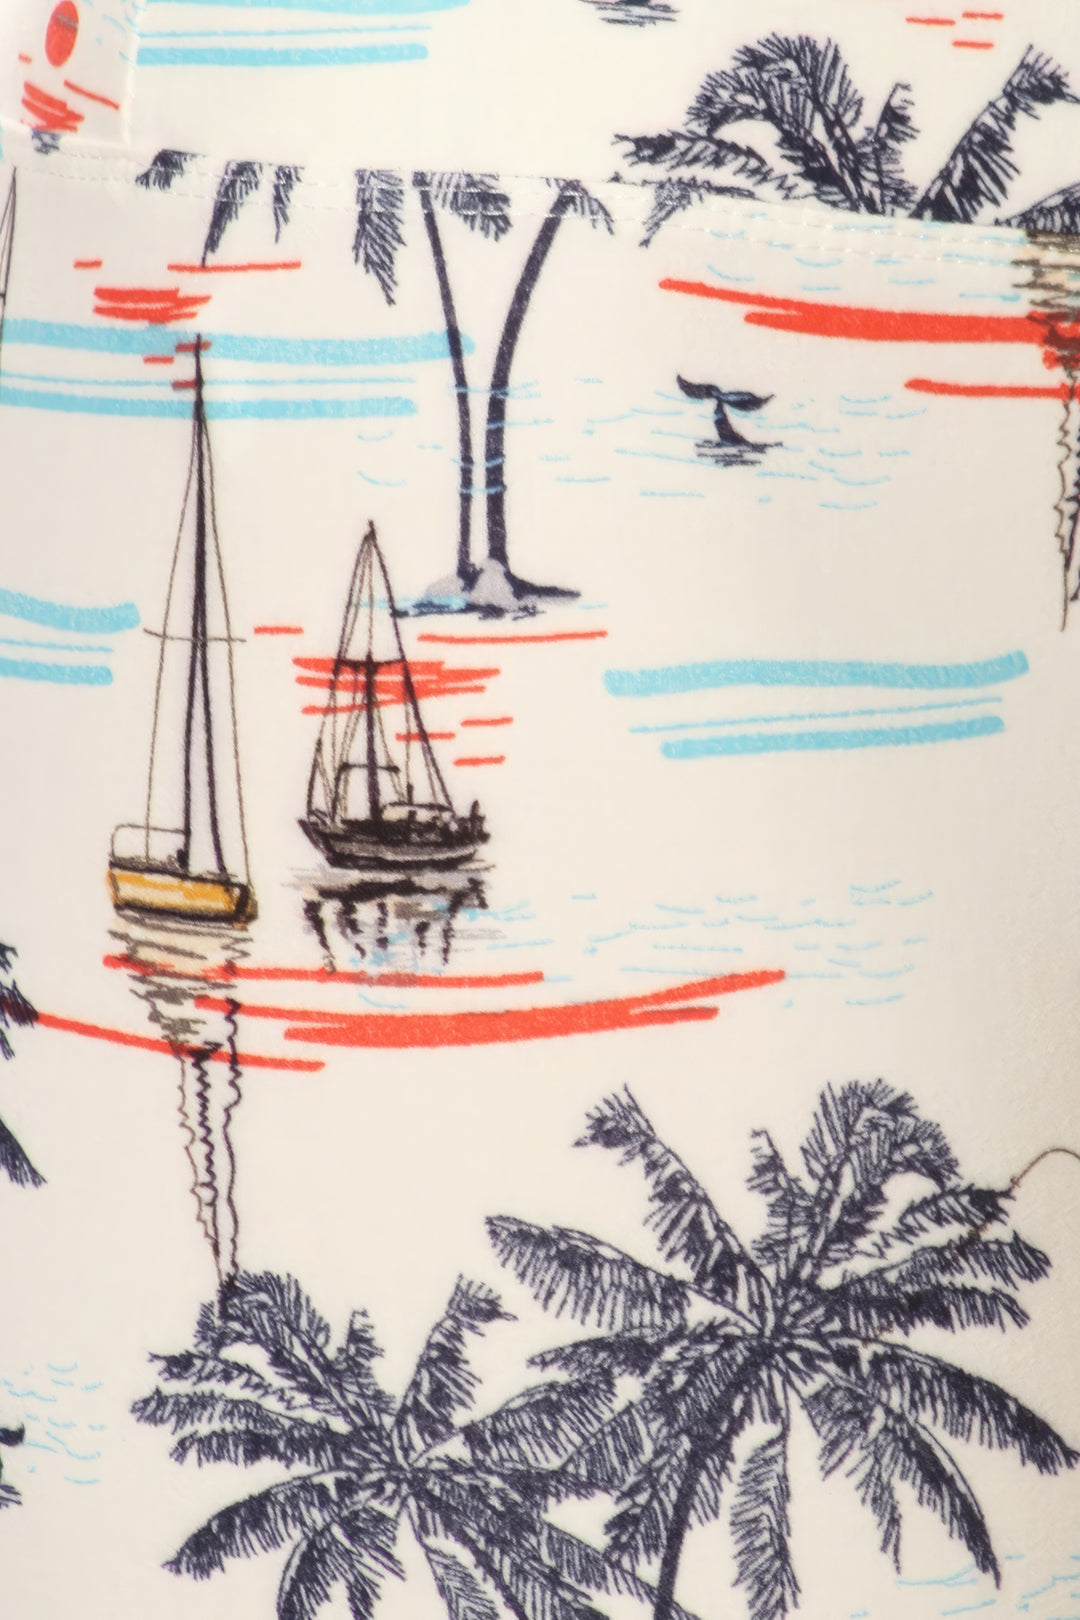 a close up of a shirt with a boat and palm trees on it